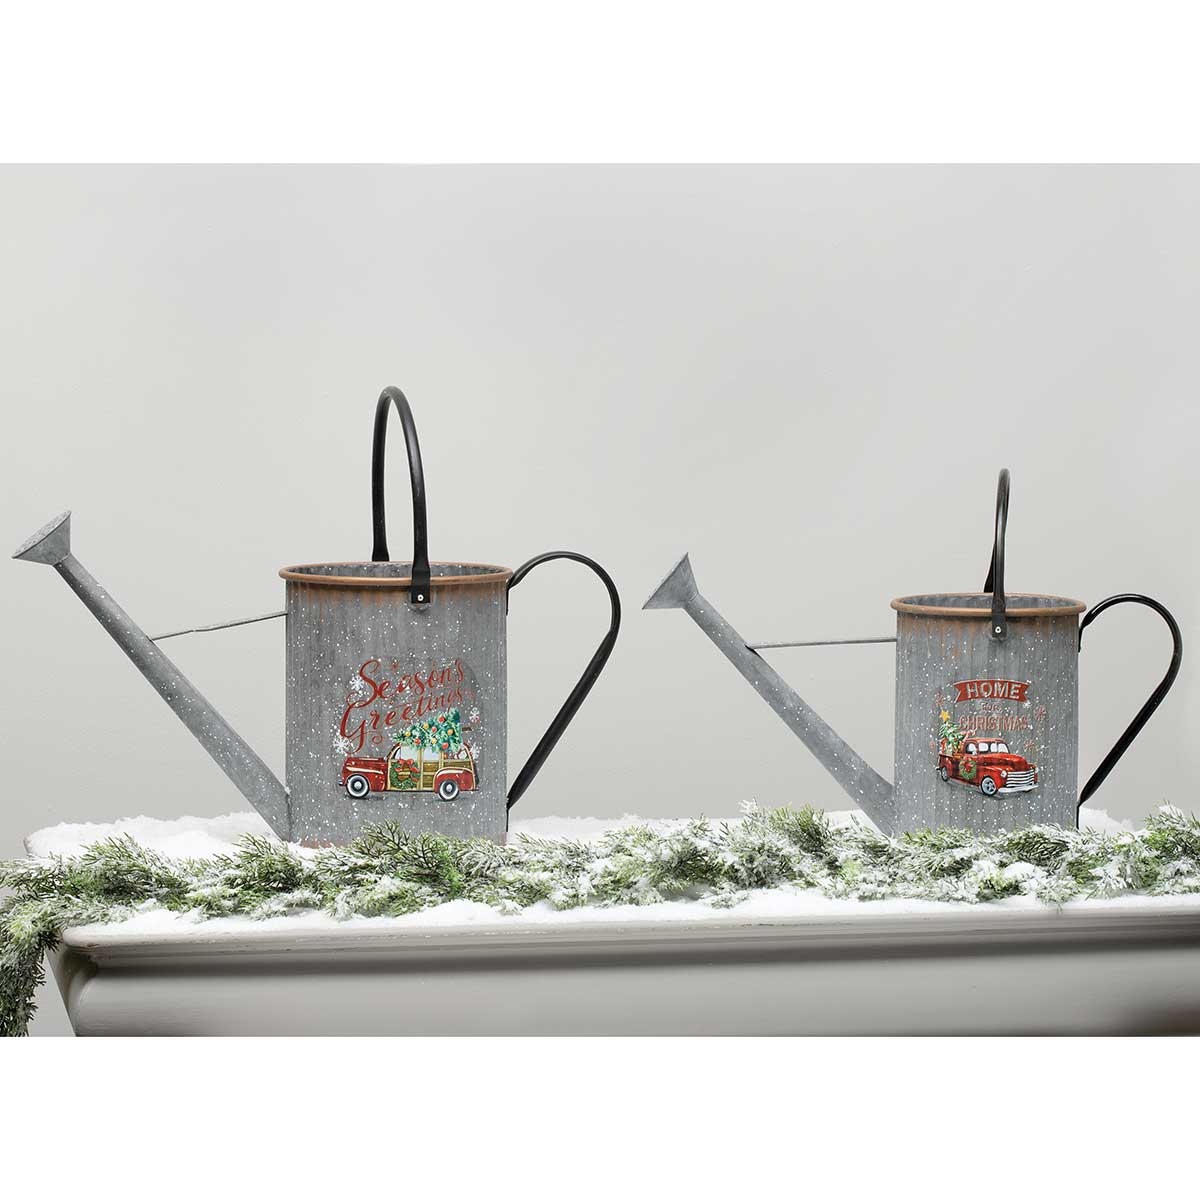 WATERING CAN TRUCK HOME 22IN X 10.5IN X 16.5IN METAL